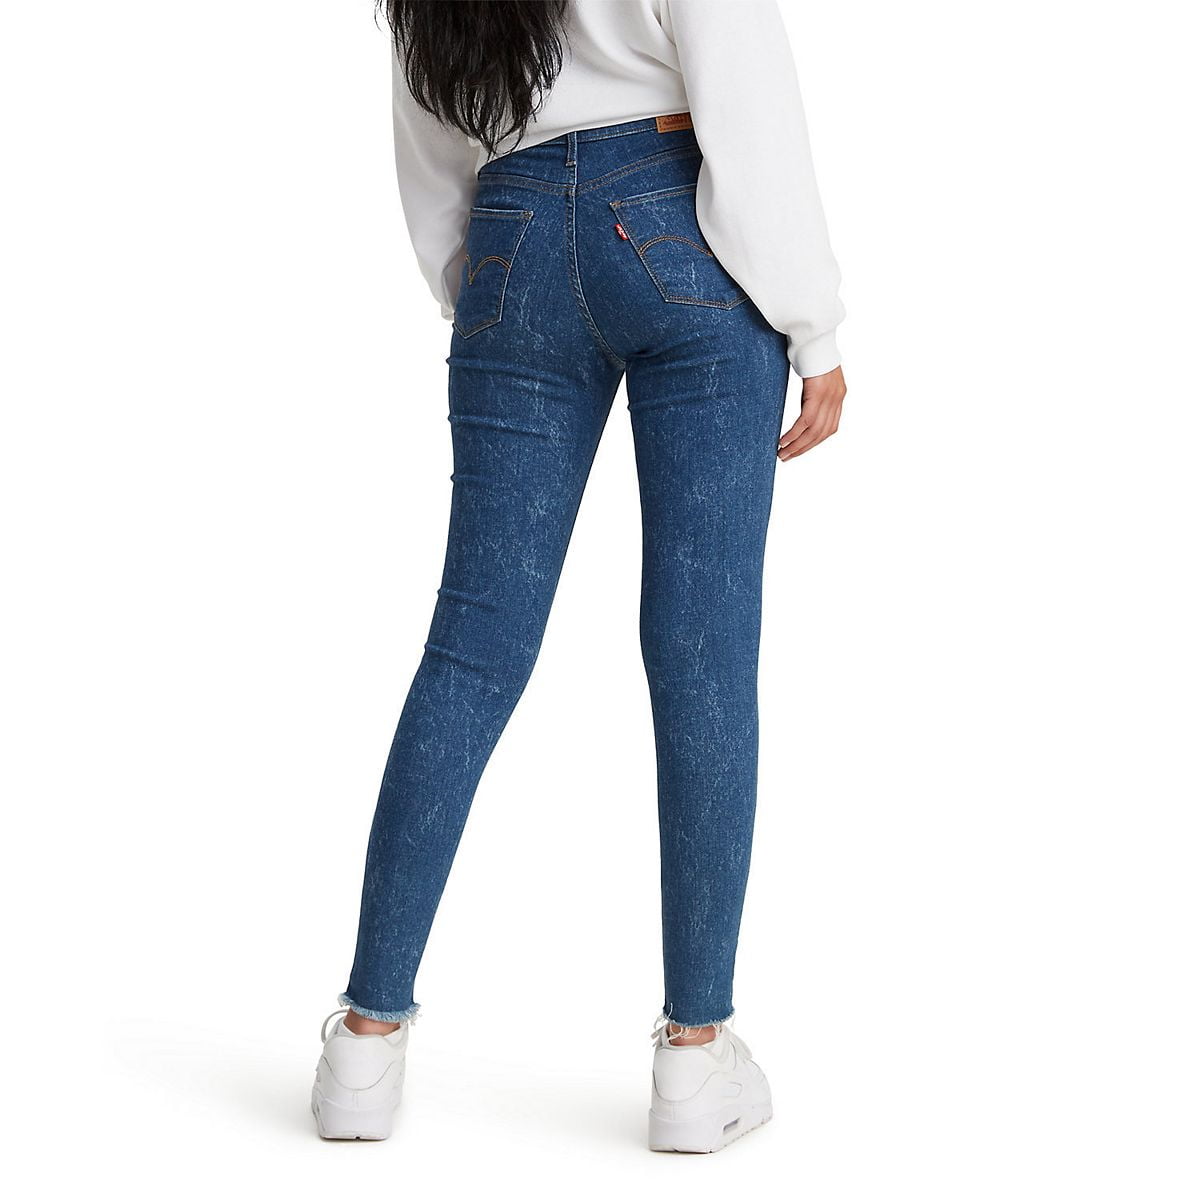 Levi's Women's 720 High Rise Super Skinny Jeans (Also Available in